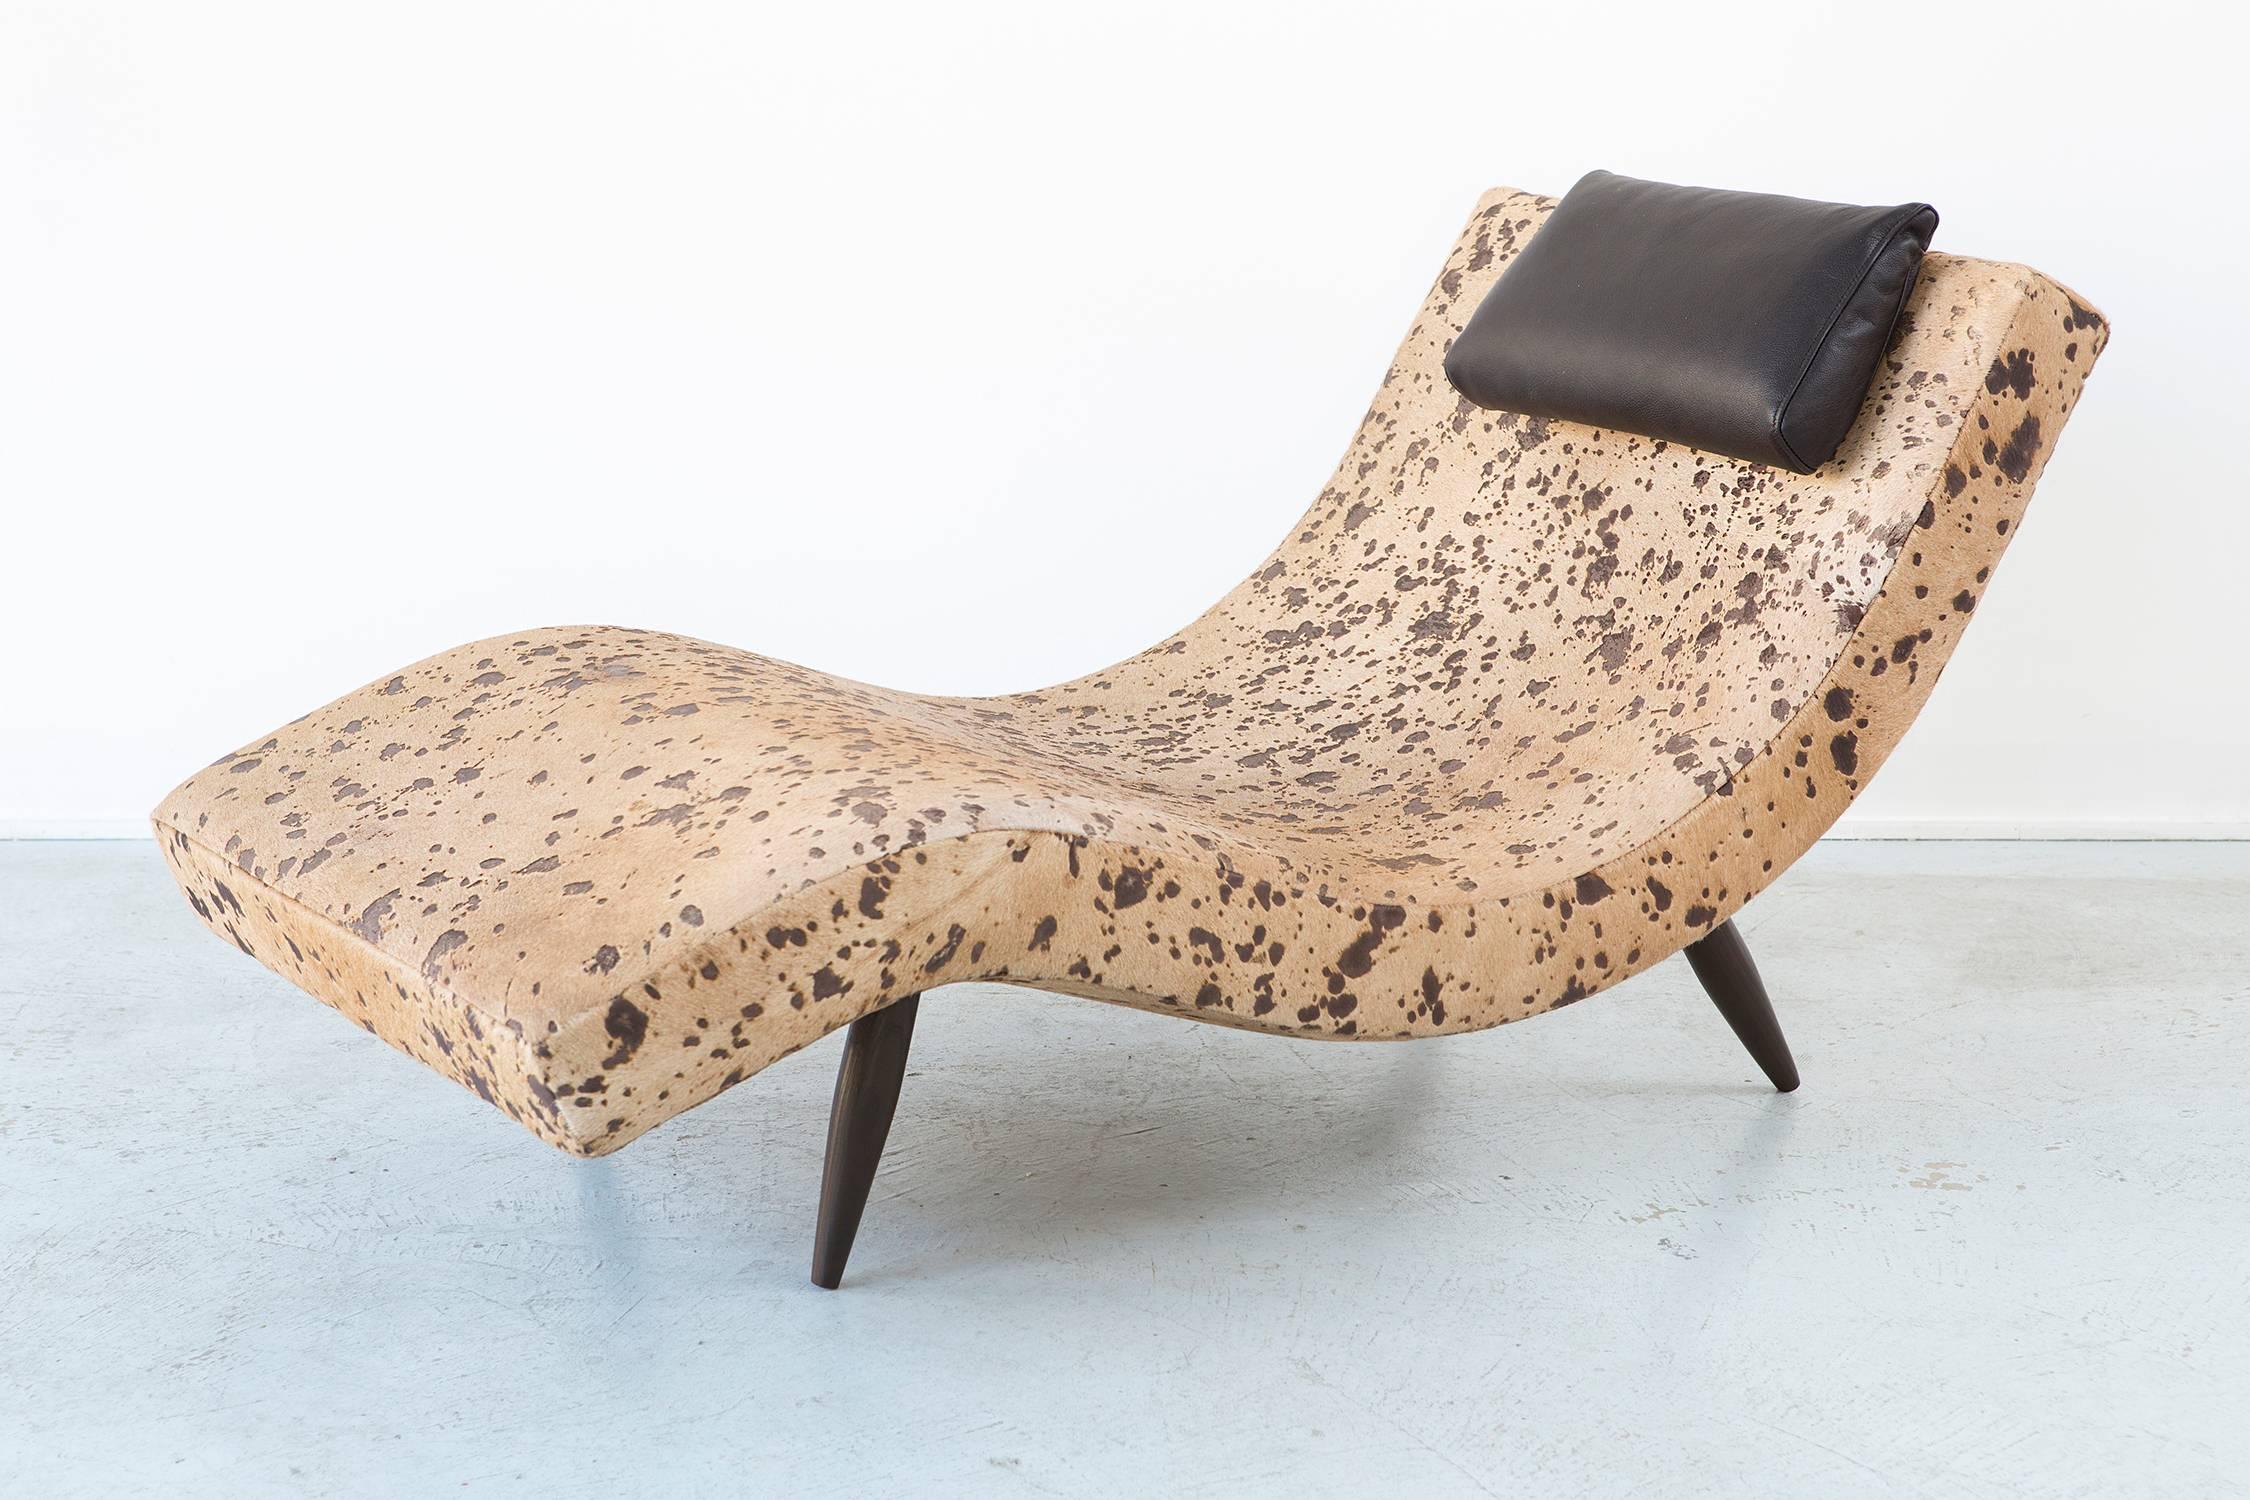 This Adrian Pearsall wave chaise is the more obscure singular version   recovered in a unique one-off acid treated cowhide that holds inviting earth tones.

Adrian Pearsall was known for his flamboyant and extravagant designs that have stood the